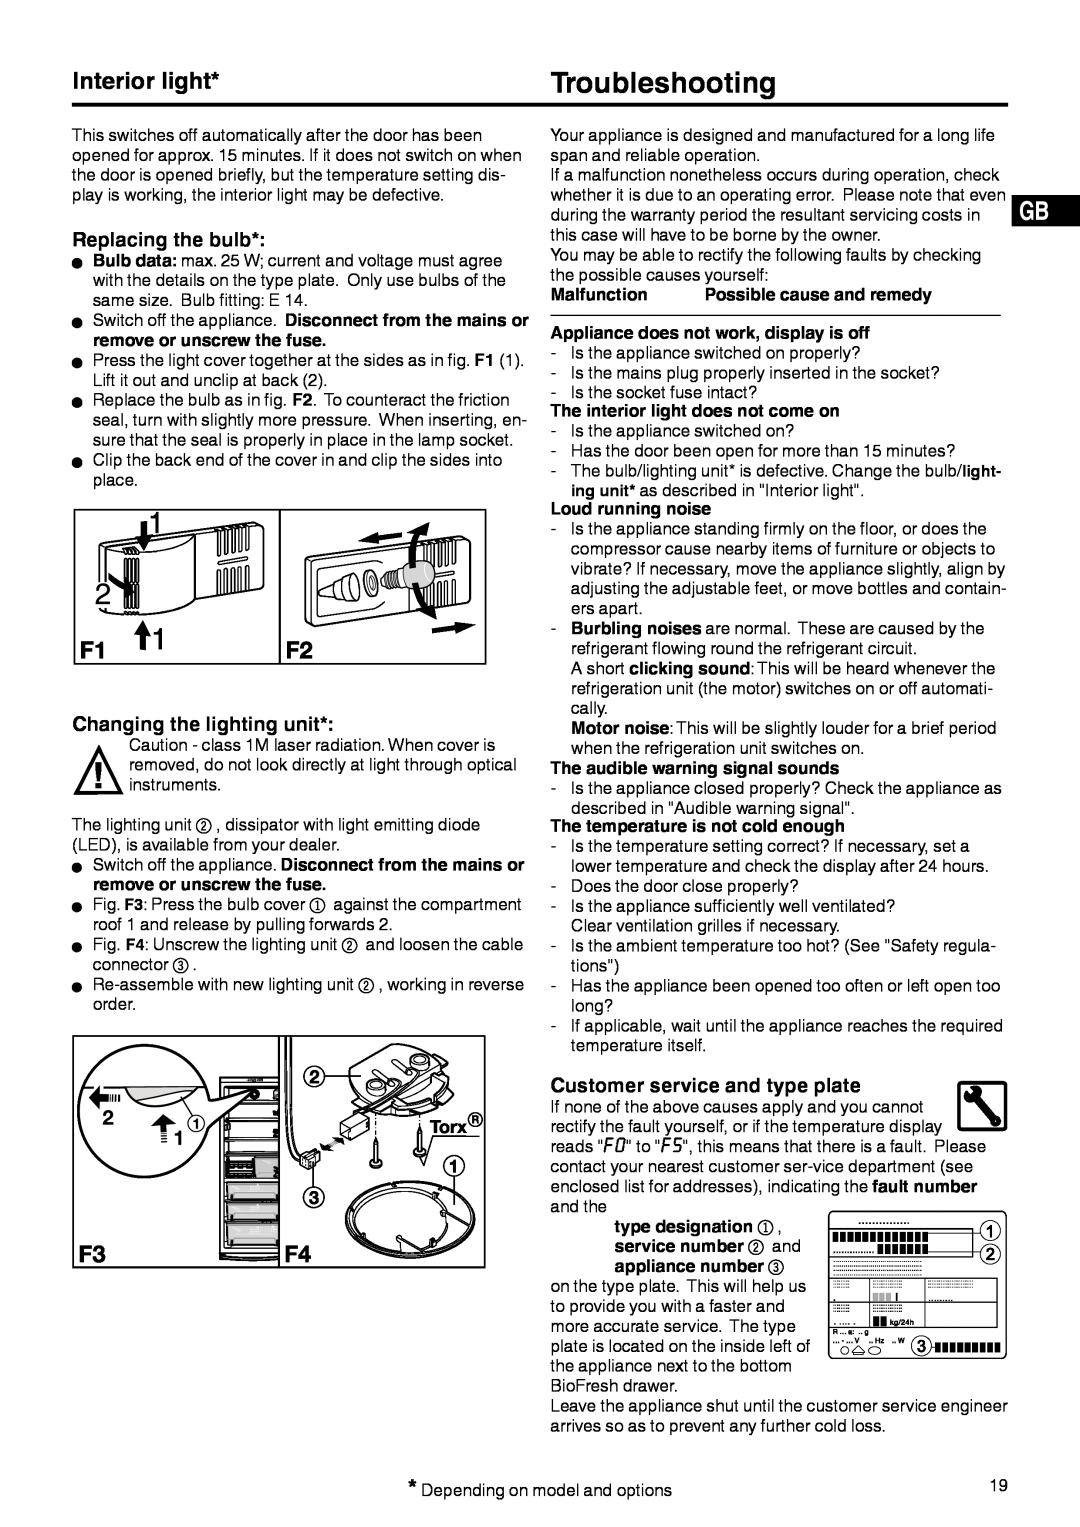 Liebherr 7082 212-02 manual Troubleshooting, Interior light, Replacing the bulb, Changing the lighting unit, Malfunction 